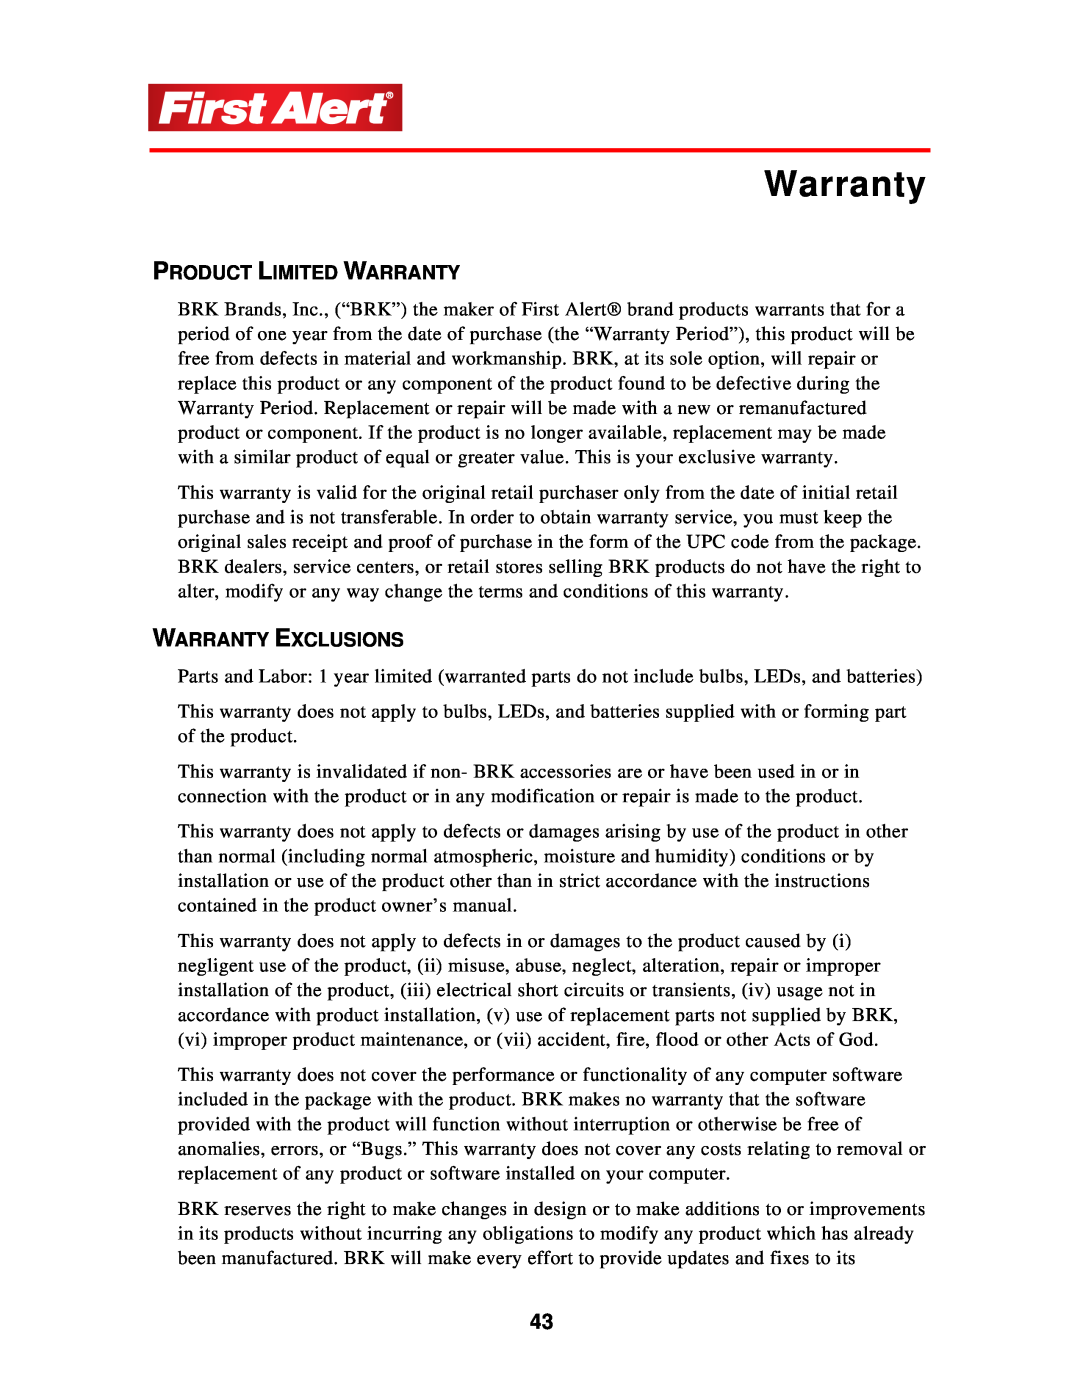 First Alert 1501 user manual Product Limited Warranty, Warranty Exclusions 